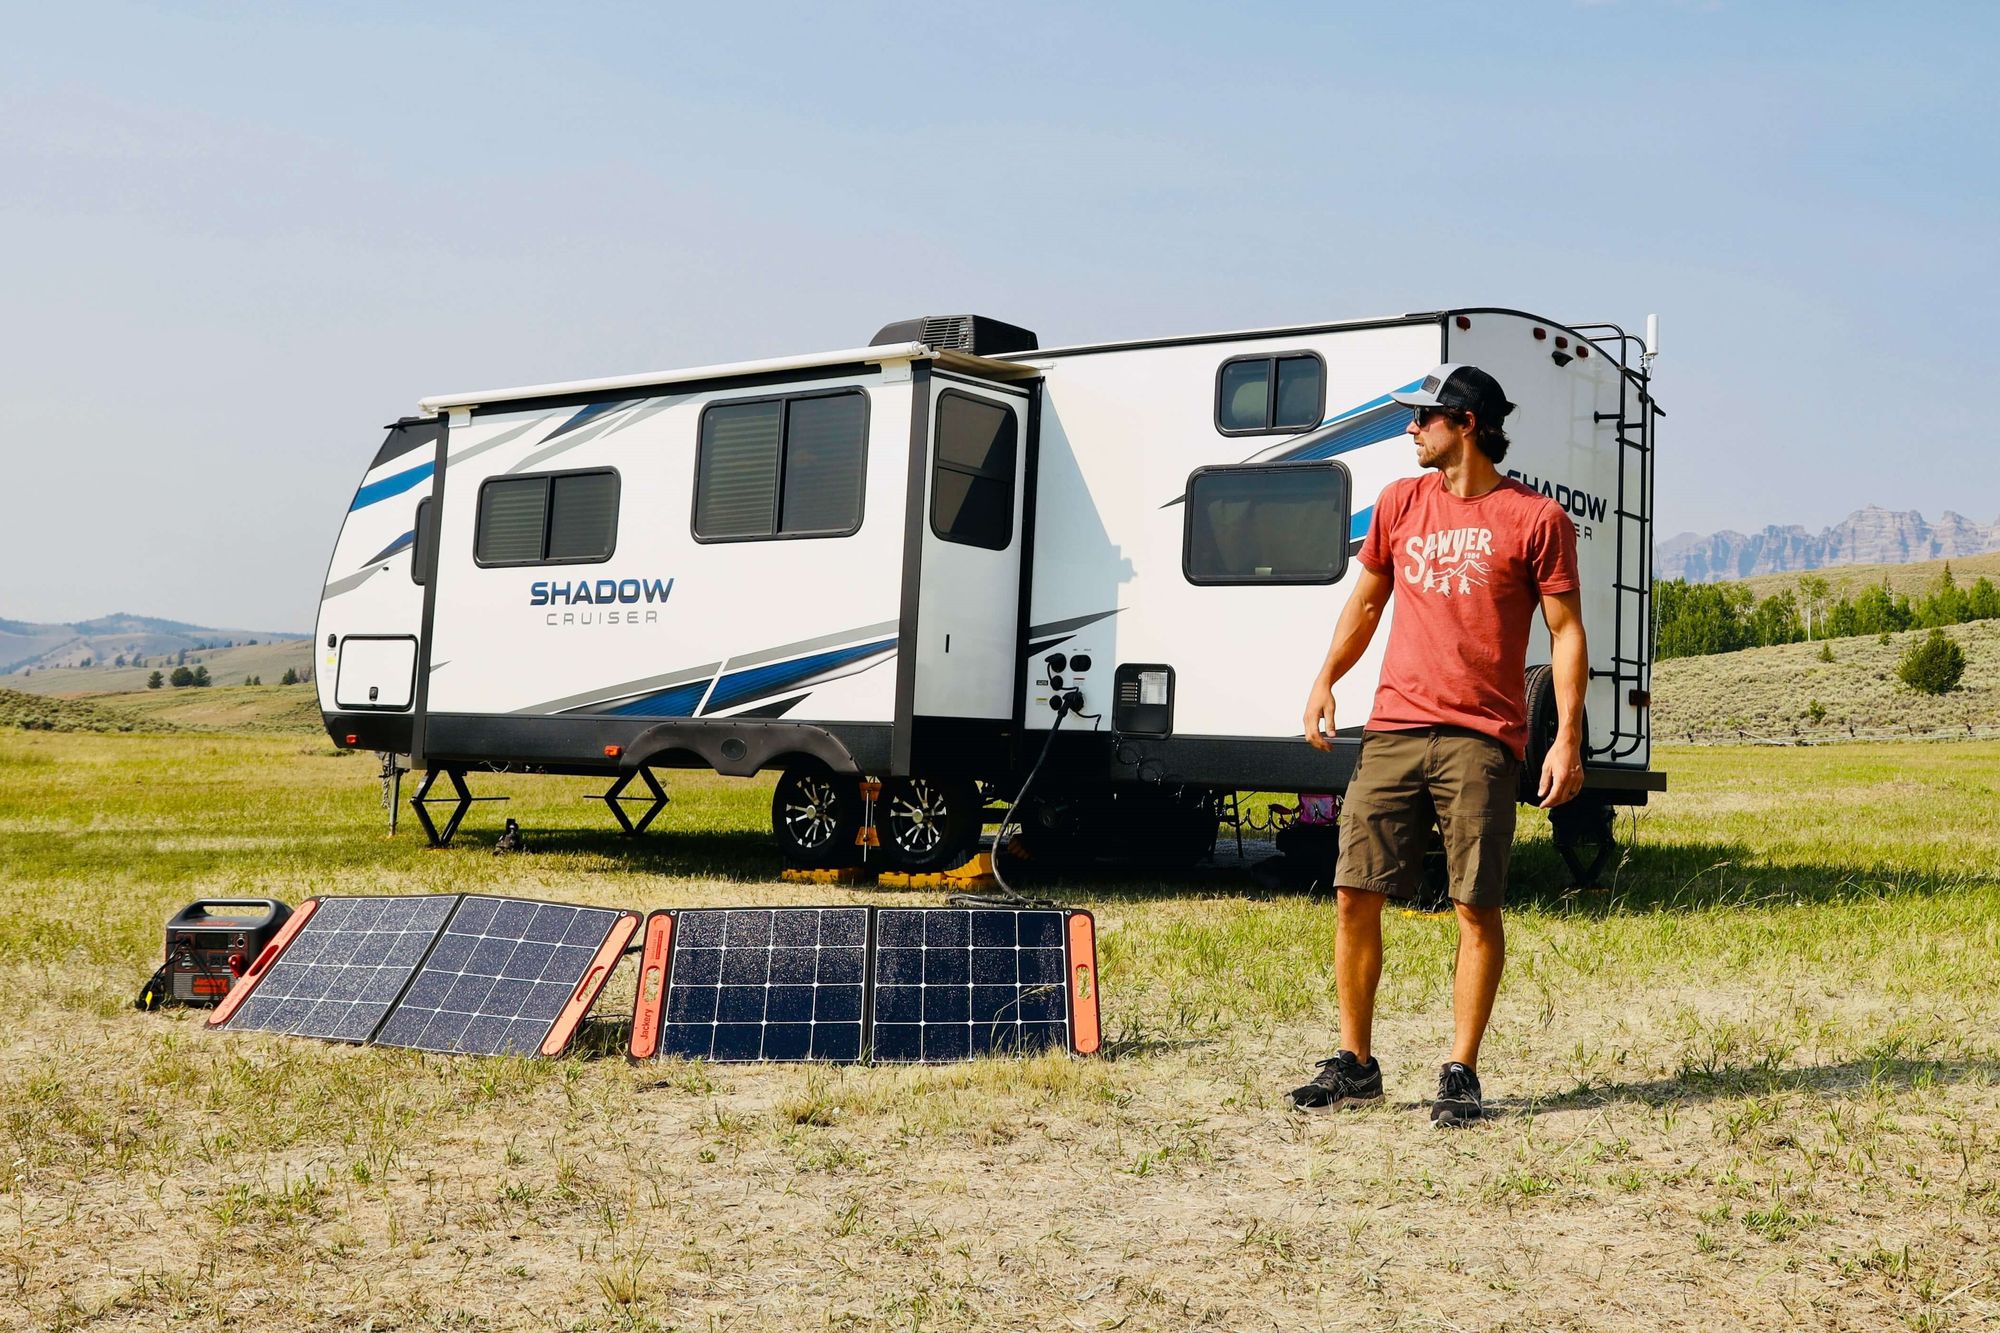 A man and his trailer outside in an open field, with a solar charger and power pack.